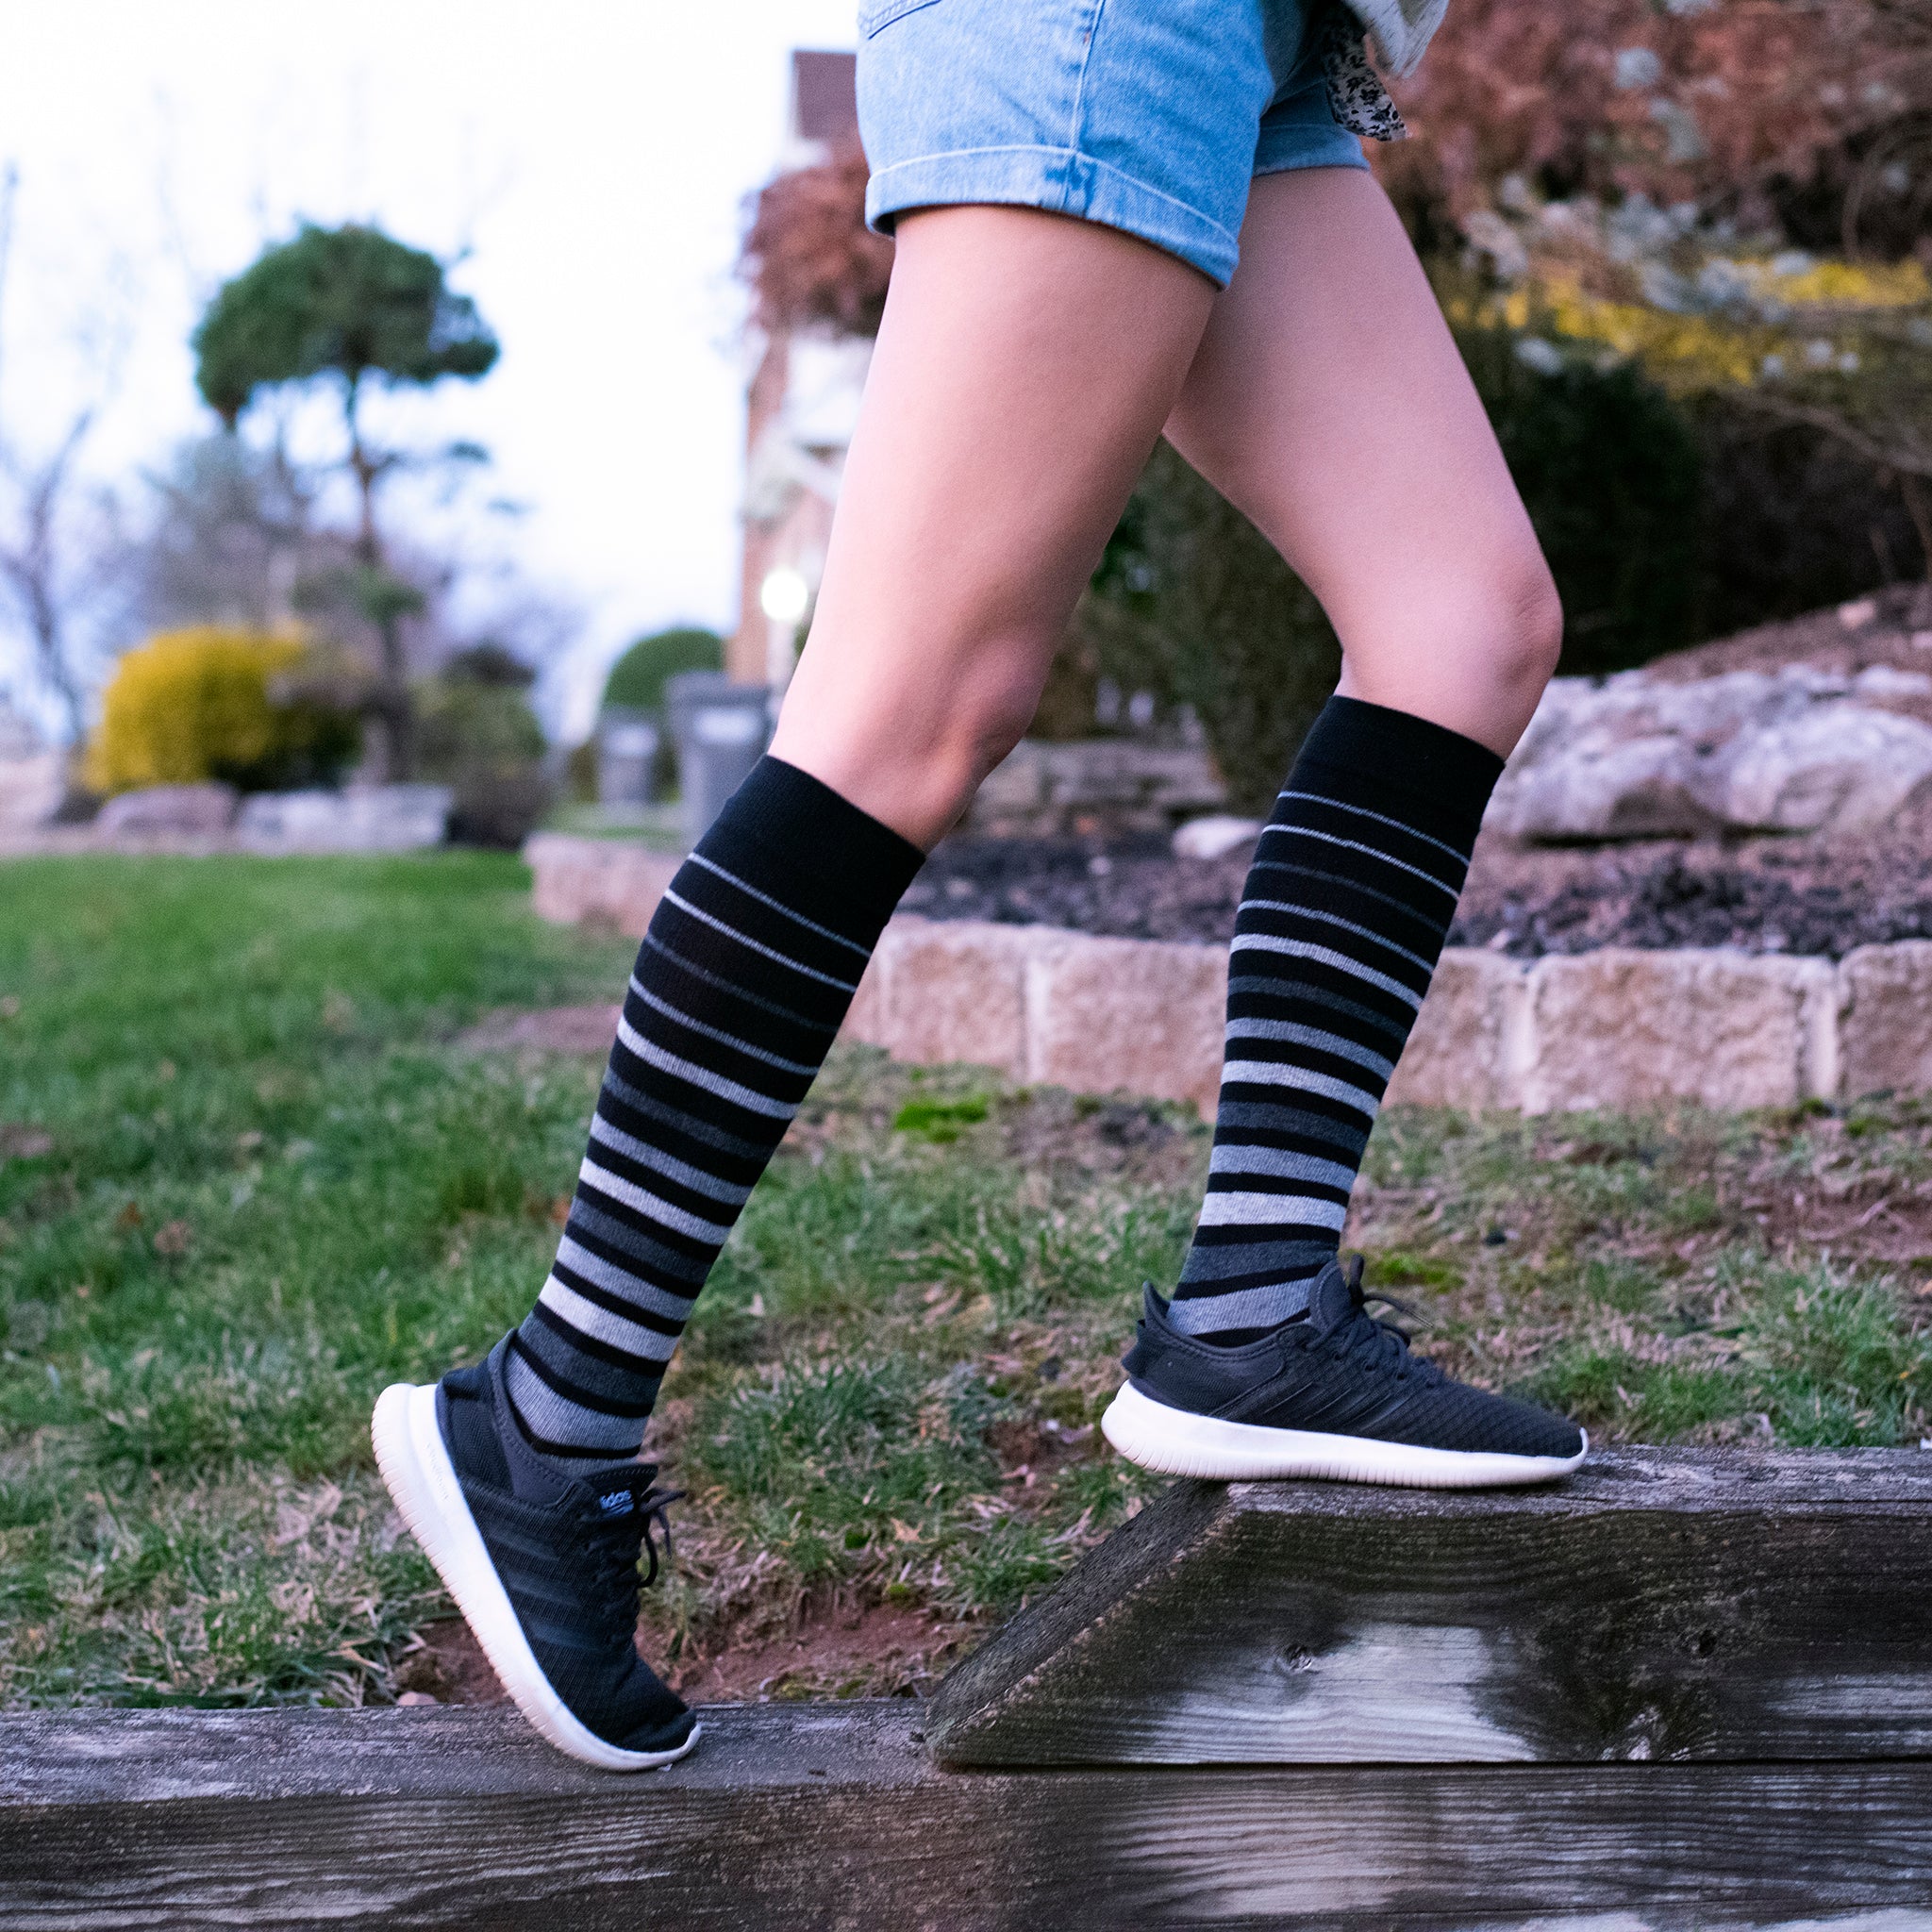 What Kinds of Compression Socks Should You Wear for Summer Running?